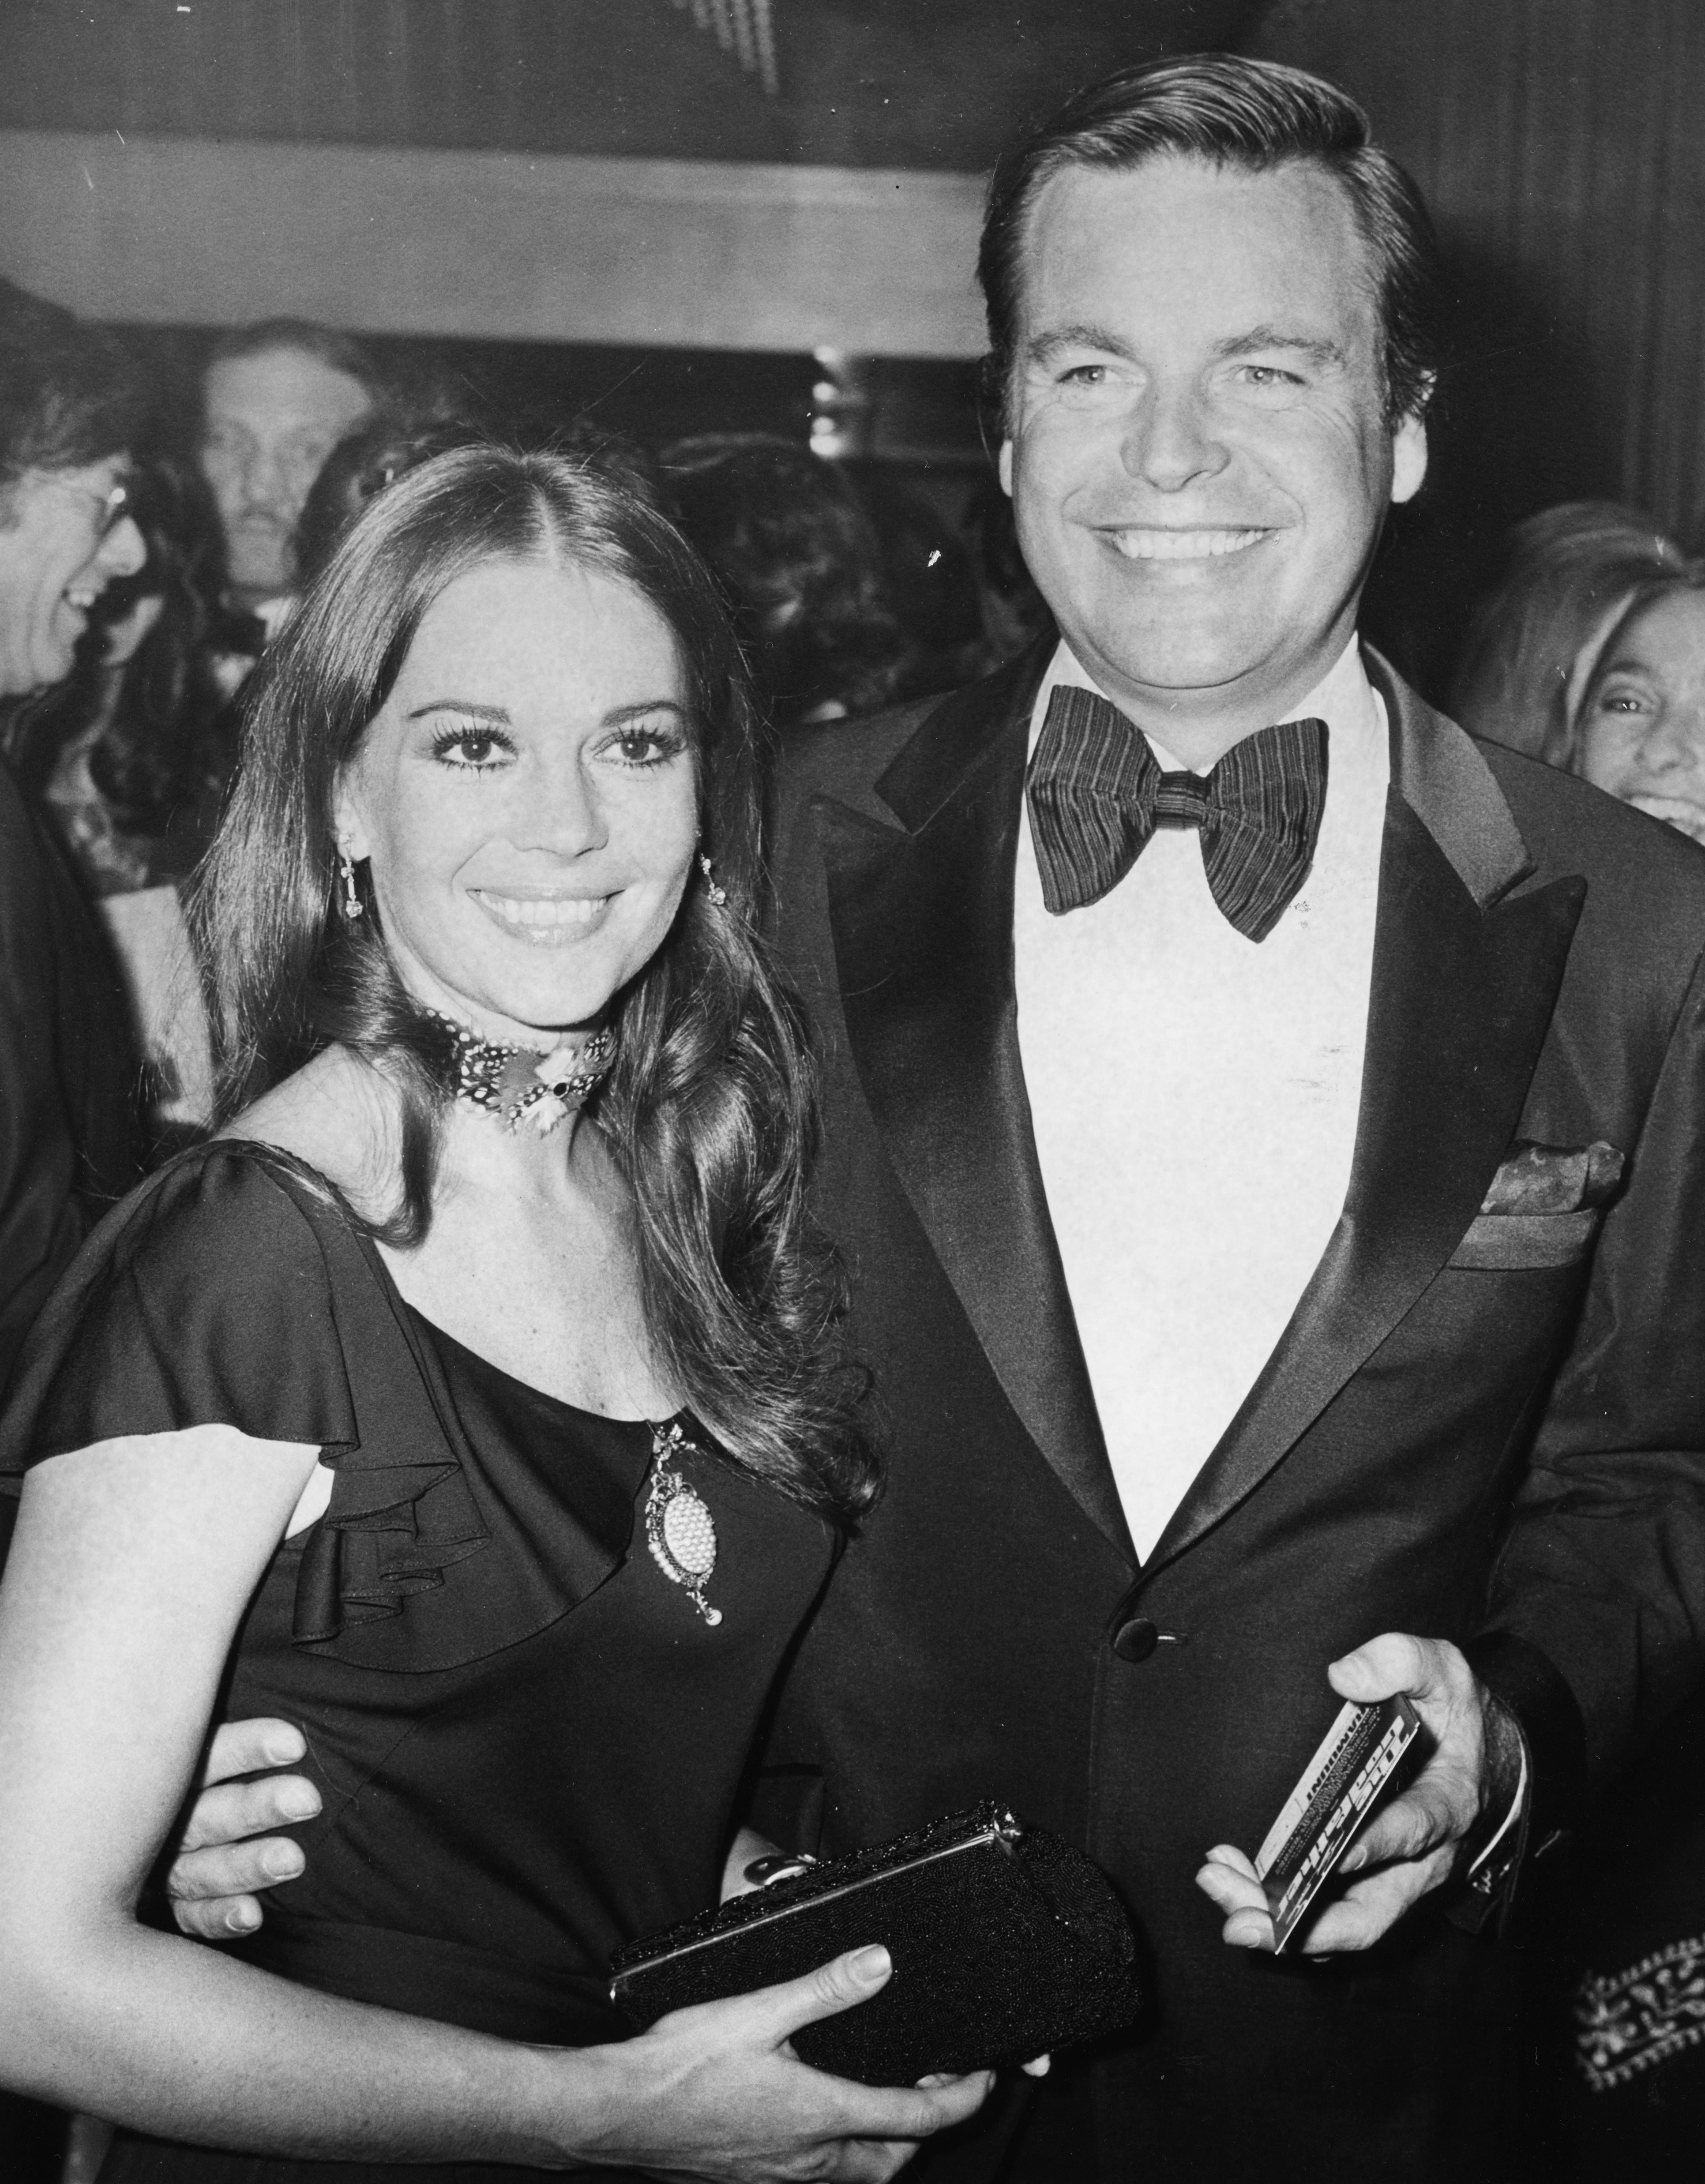 Natalie Wood and Robert Wagner at the premiere of the film ‘The Godfather’ in London on 24 August 1972